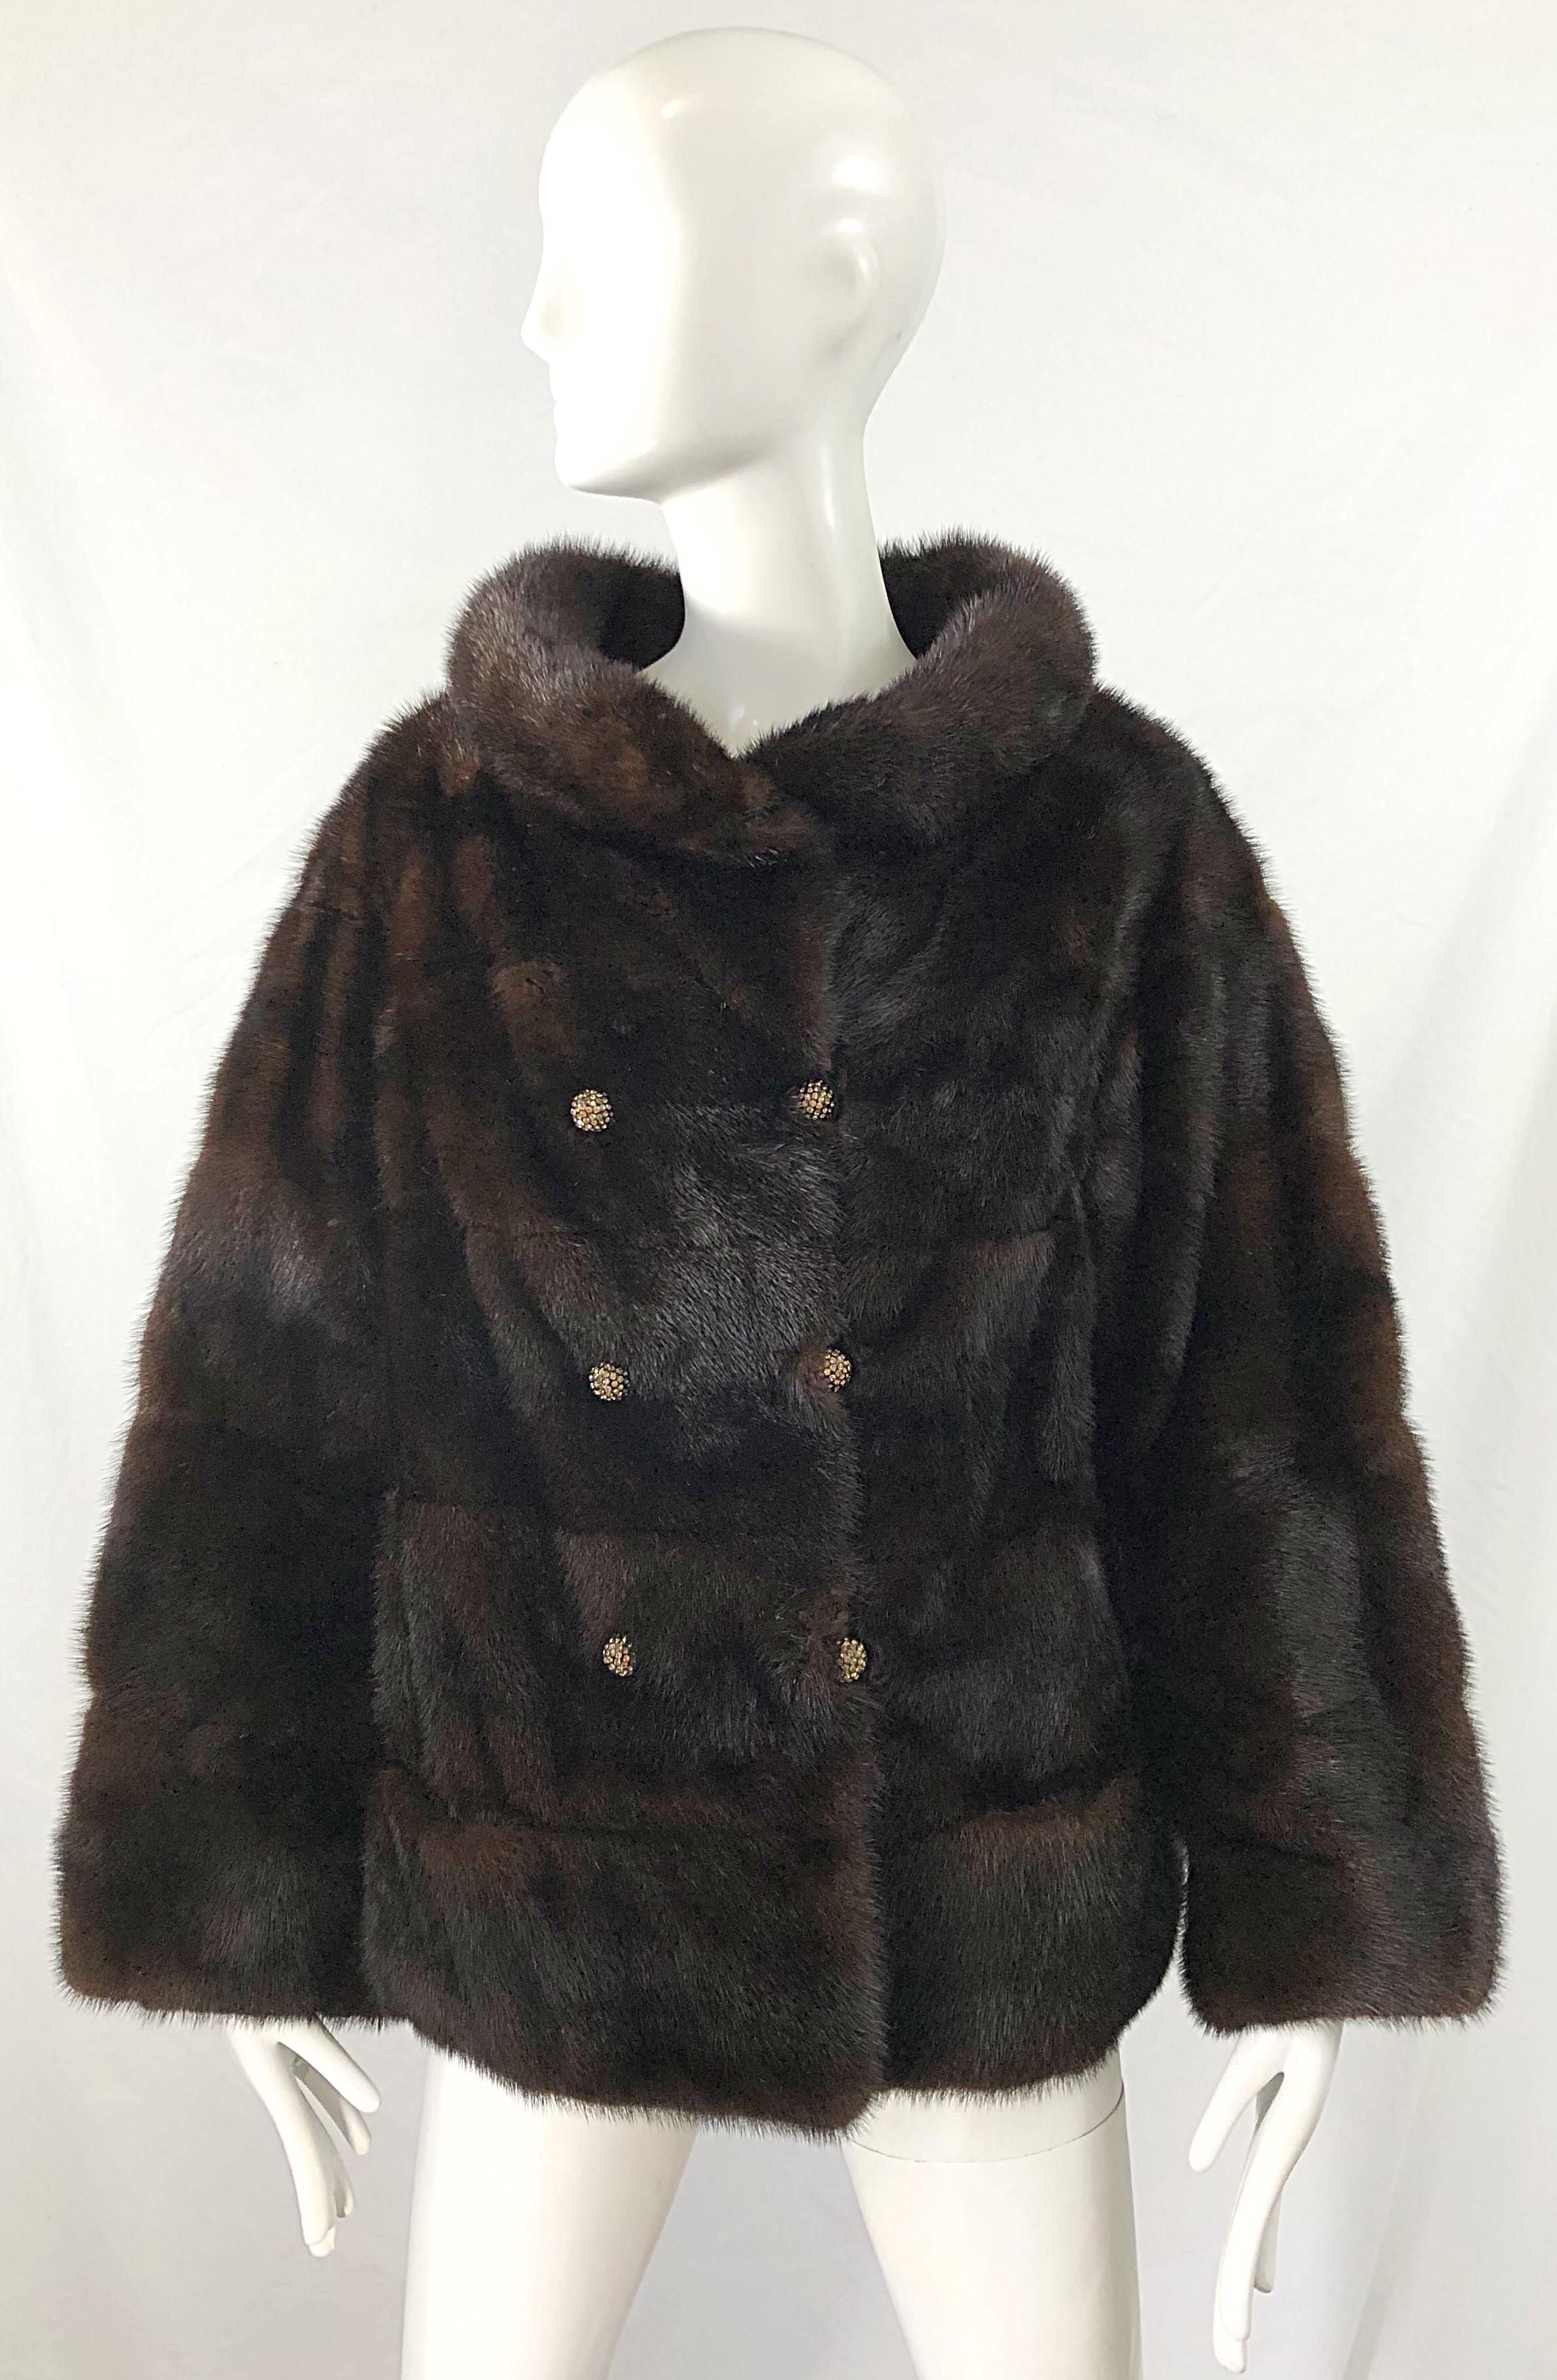 Beautiful 1960s REVILLON mink mahogany brown female pelt jacket ! Features the most luxurious mink fur that one would expect from the esteemed fur house. Double breasted style with pretty rhinestone encrusted buttons and fur hook-and-eye closure at